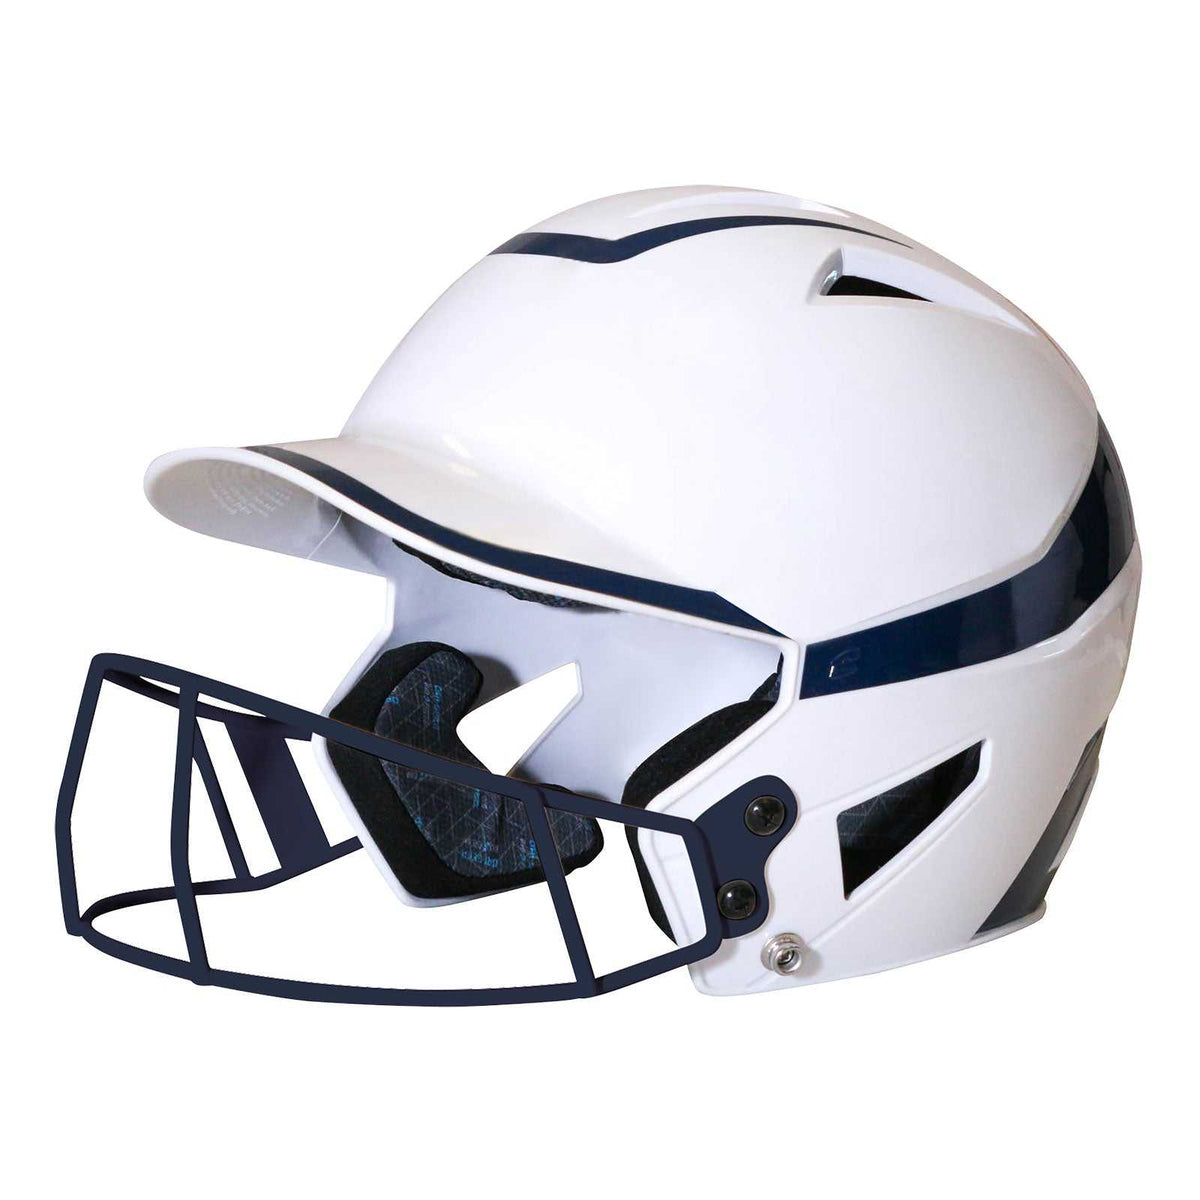 Champro HXFPG2 HX Rise Pro Softball Helmet with Facemask - White Navy - HIT a Double